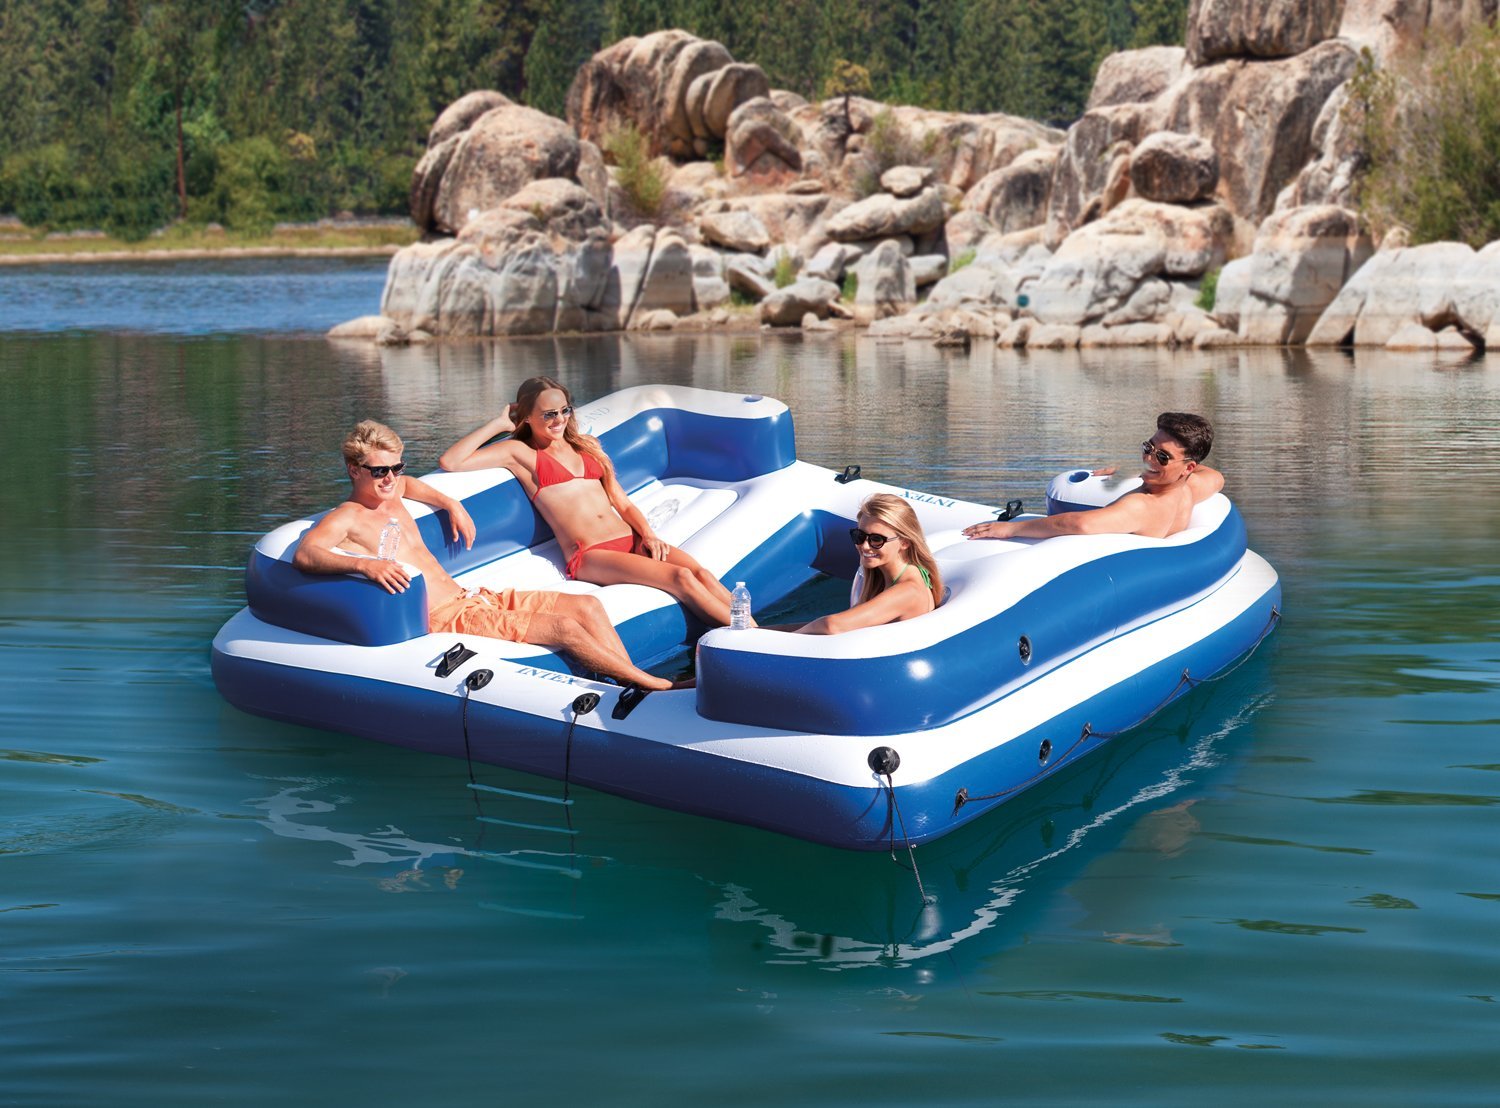 Intex Sport Inflatable Floating Oasis Island Lounge Blue and White 58923EP